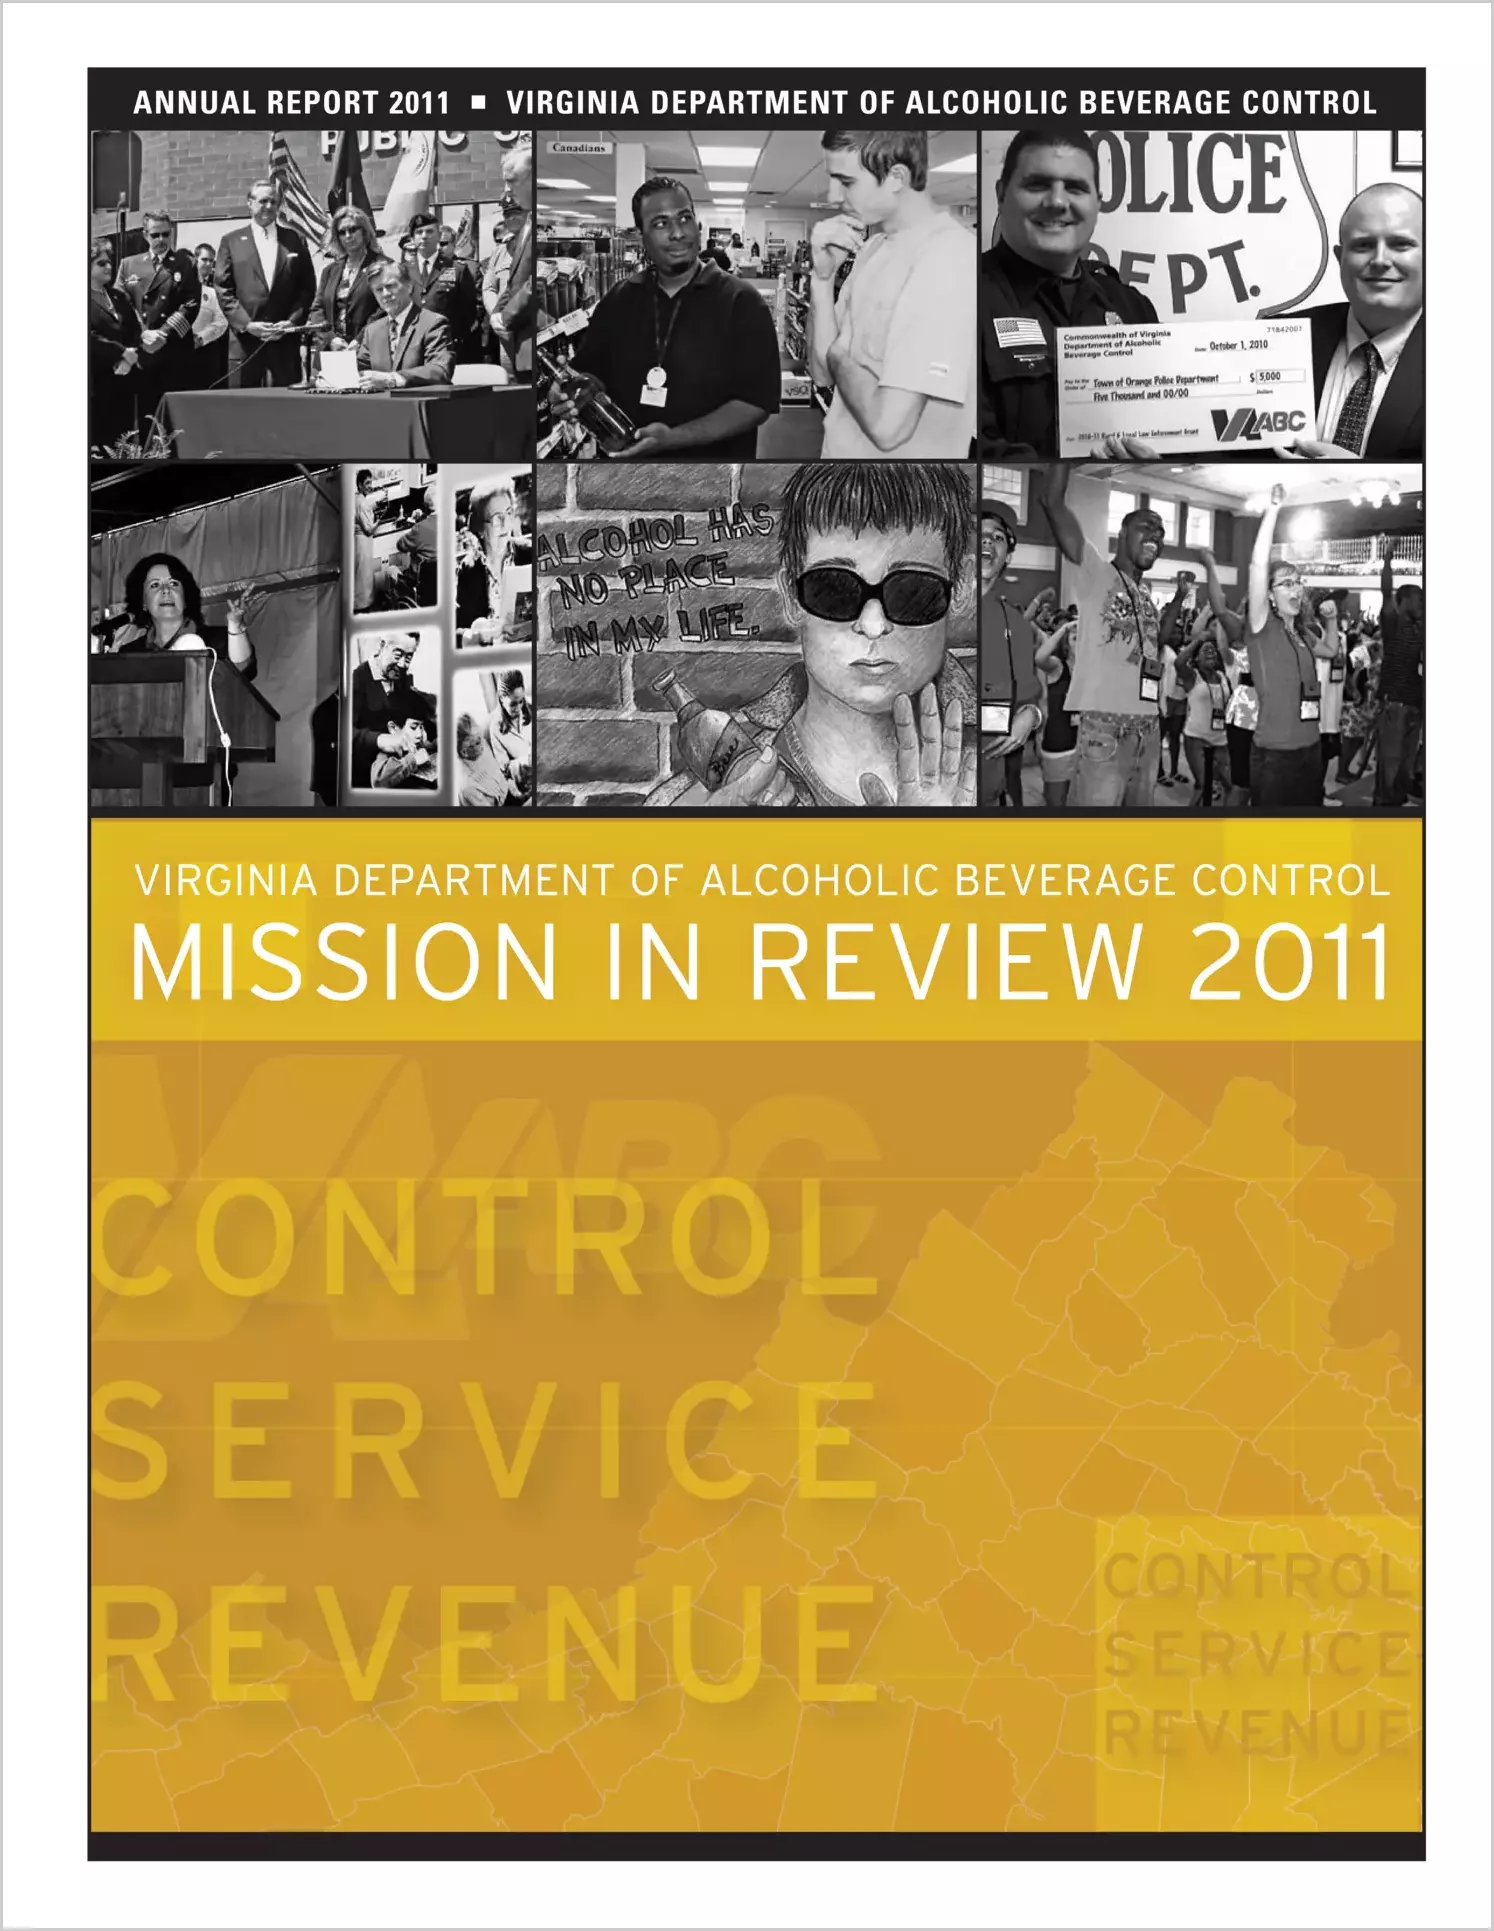 Department of Alcoholic Beverage Control Annual Report 2011